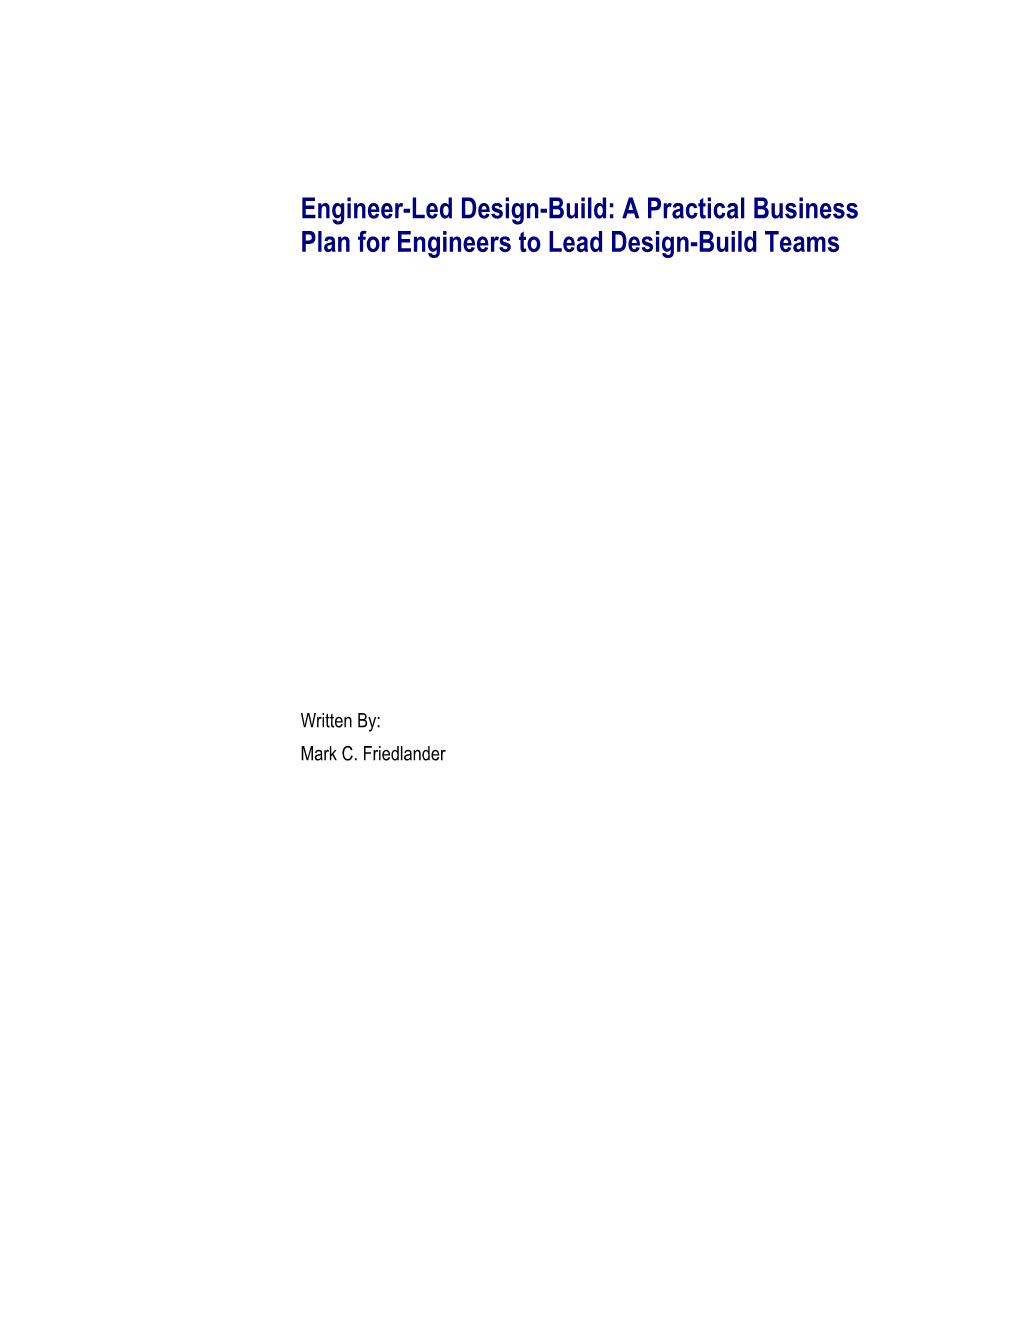 Engineer-Led Design-Build: a Practical Business Plan for Engineers to Lead Design-Build Teams